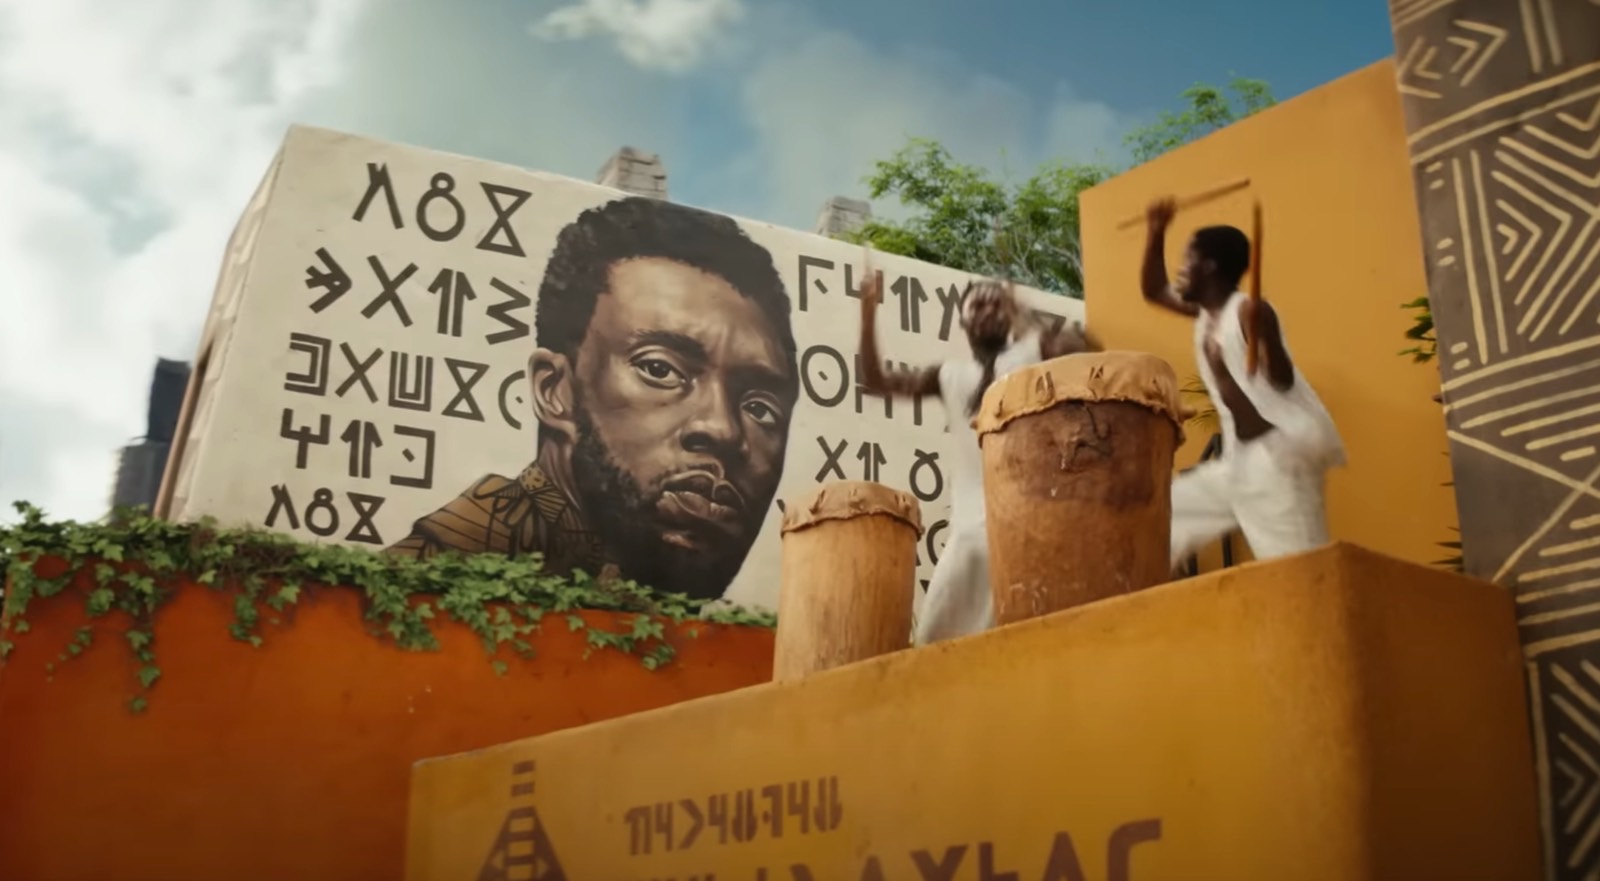 Marvel releases new clips from Black Panther’s Wakanda Forever. Watch them here